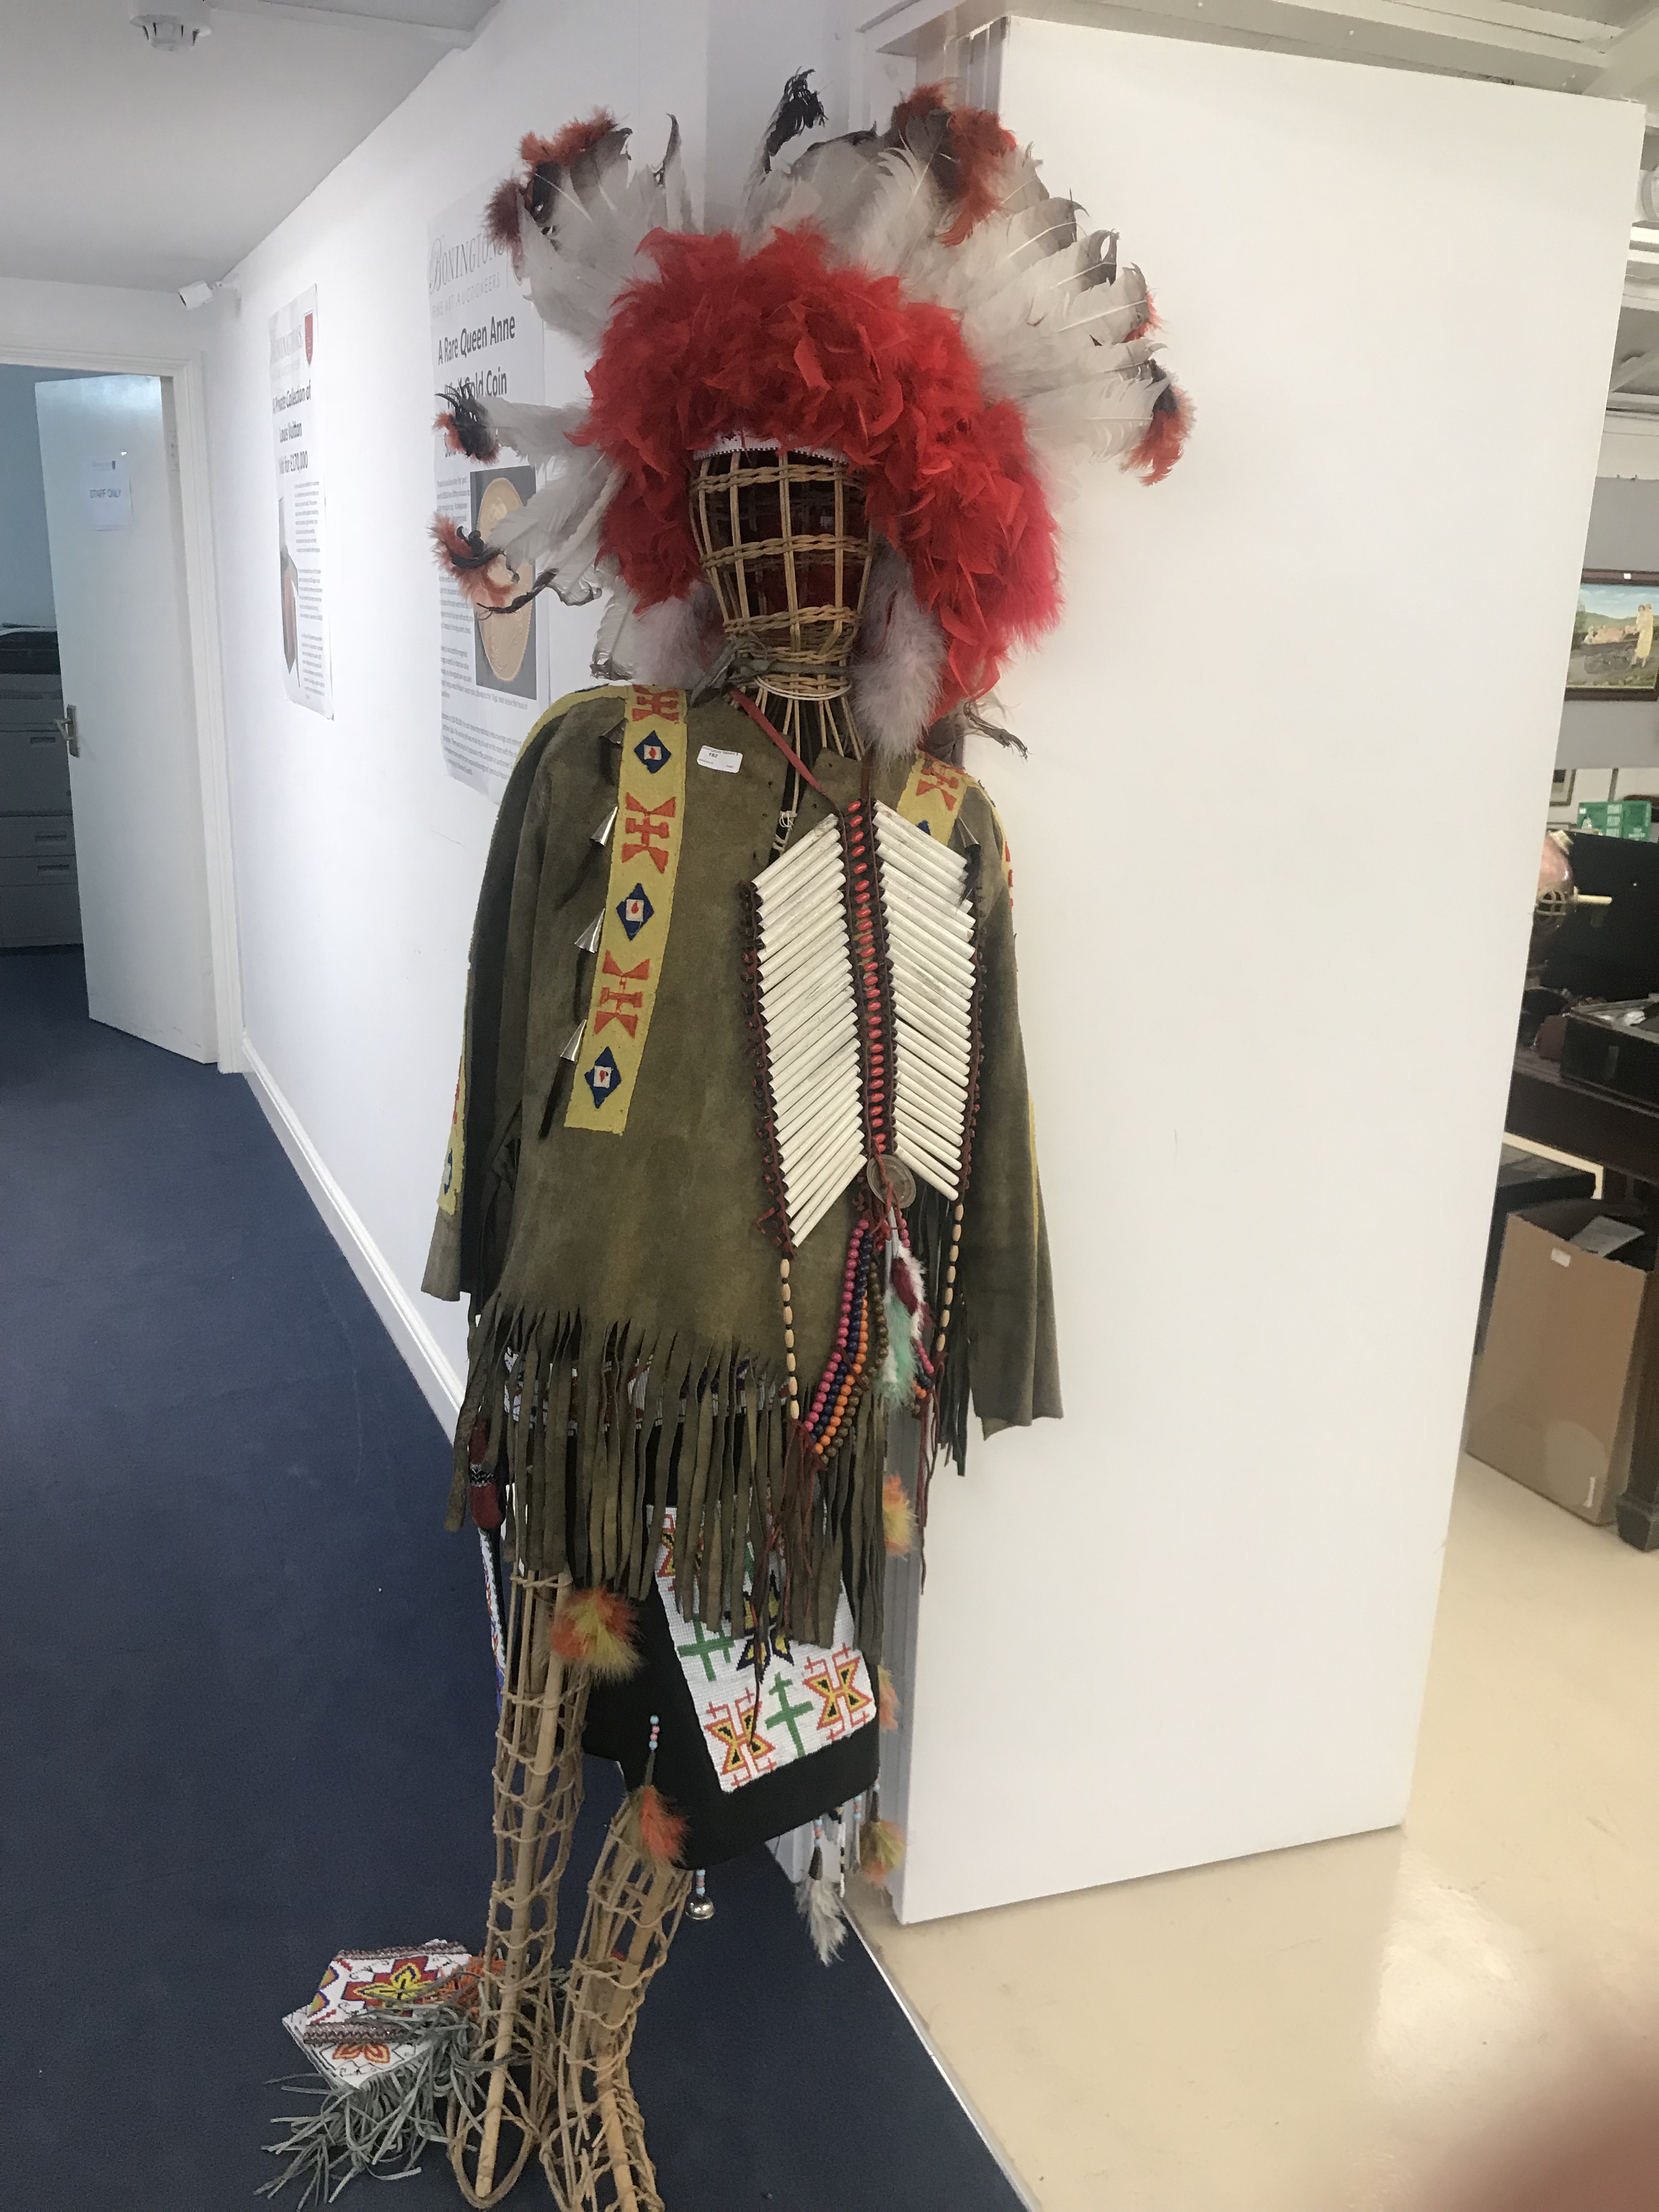 A Red Indian costume on a wicker mannequin